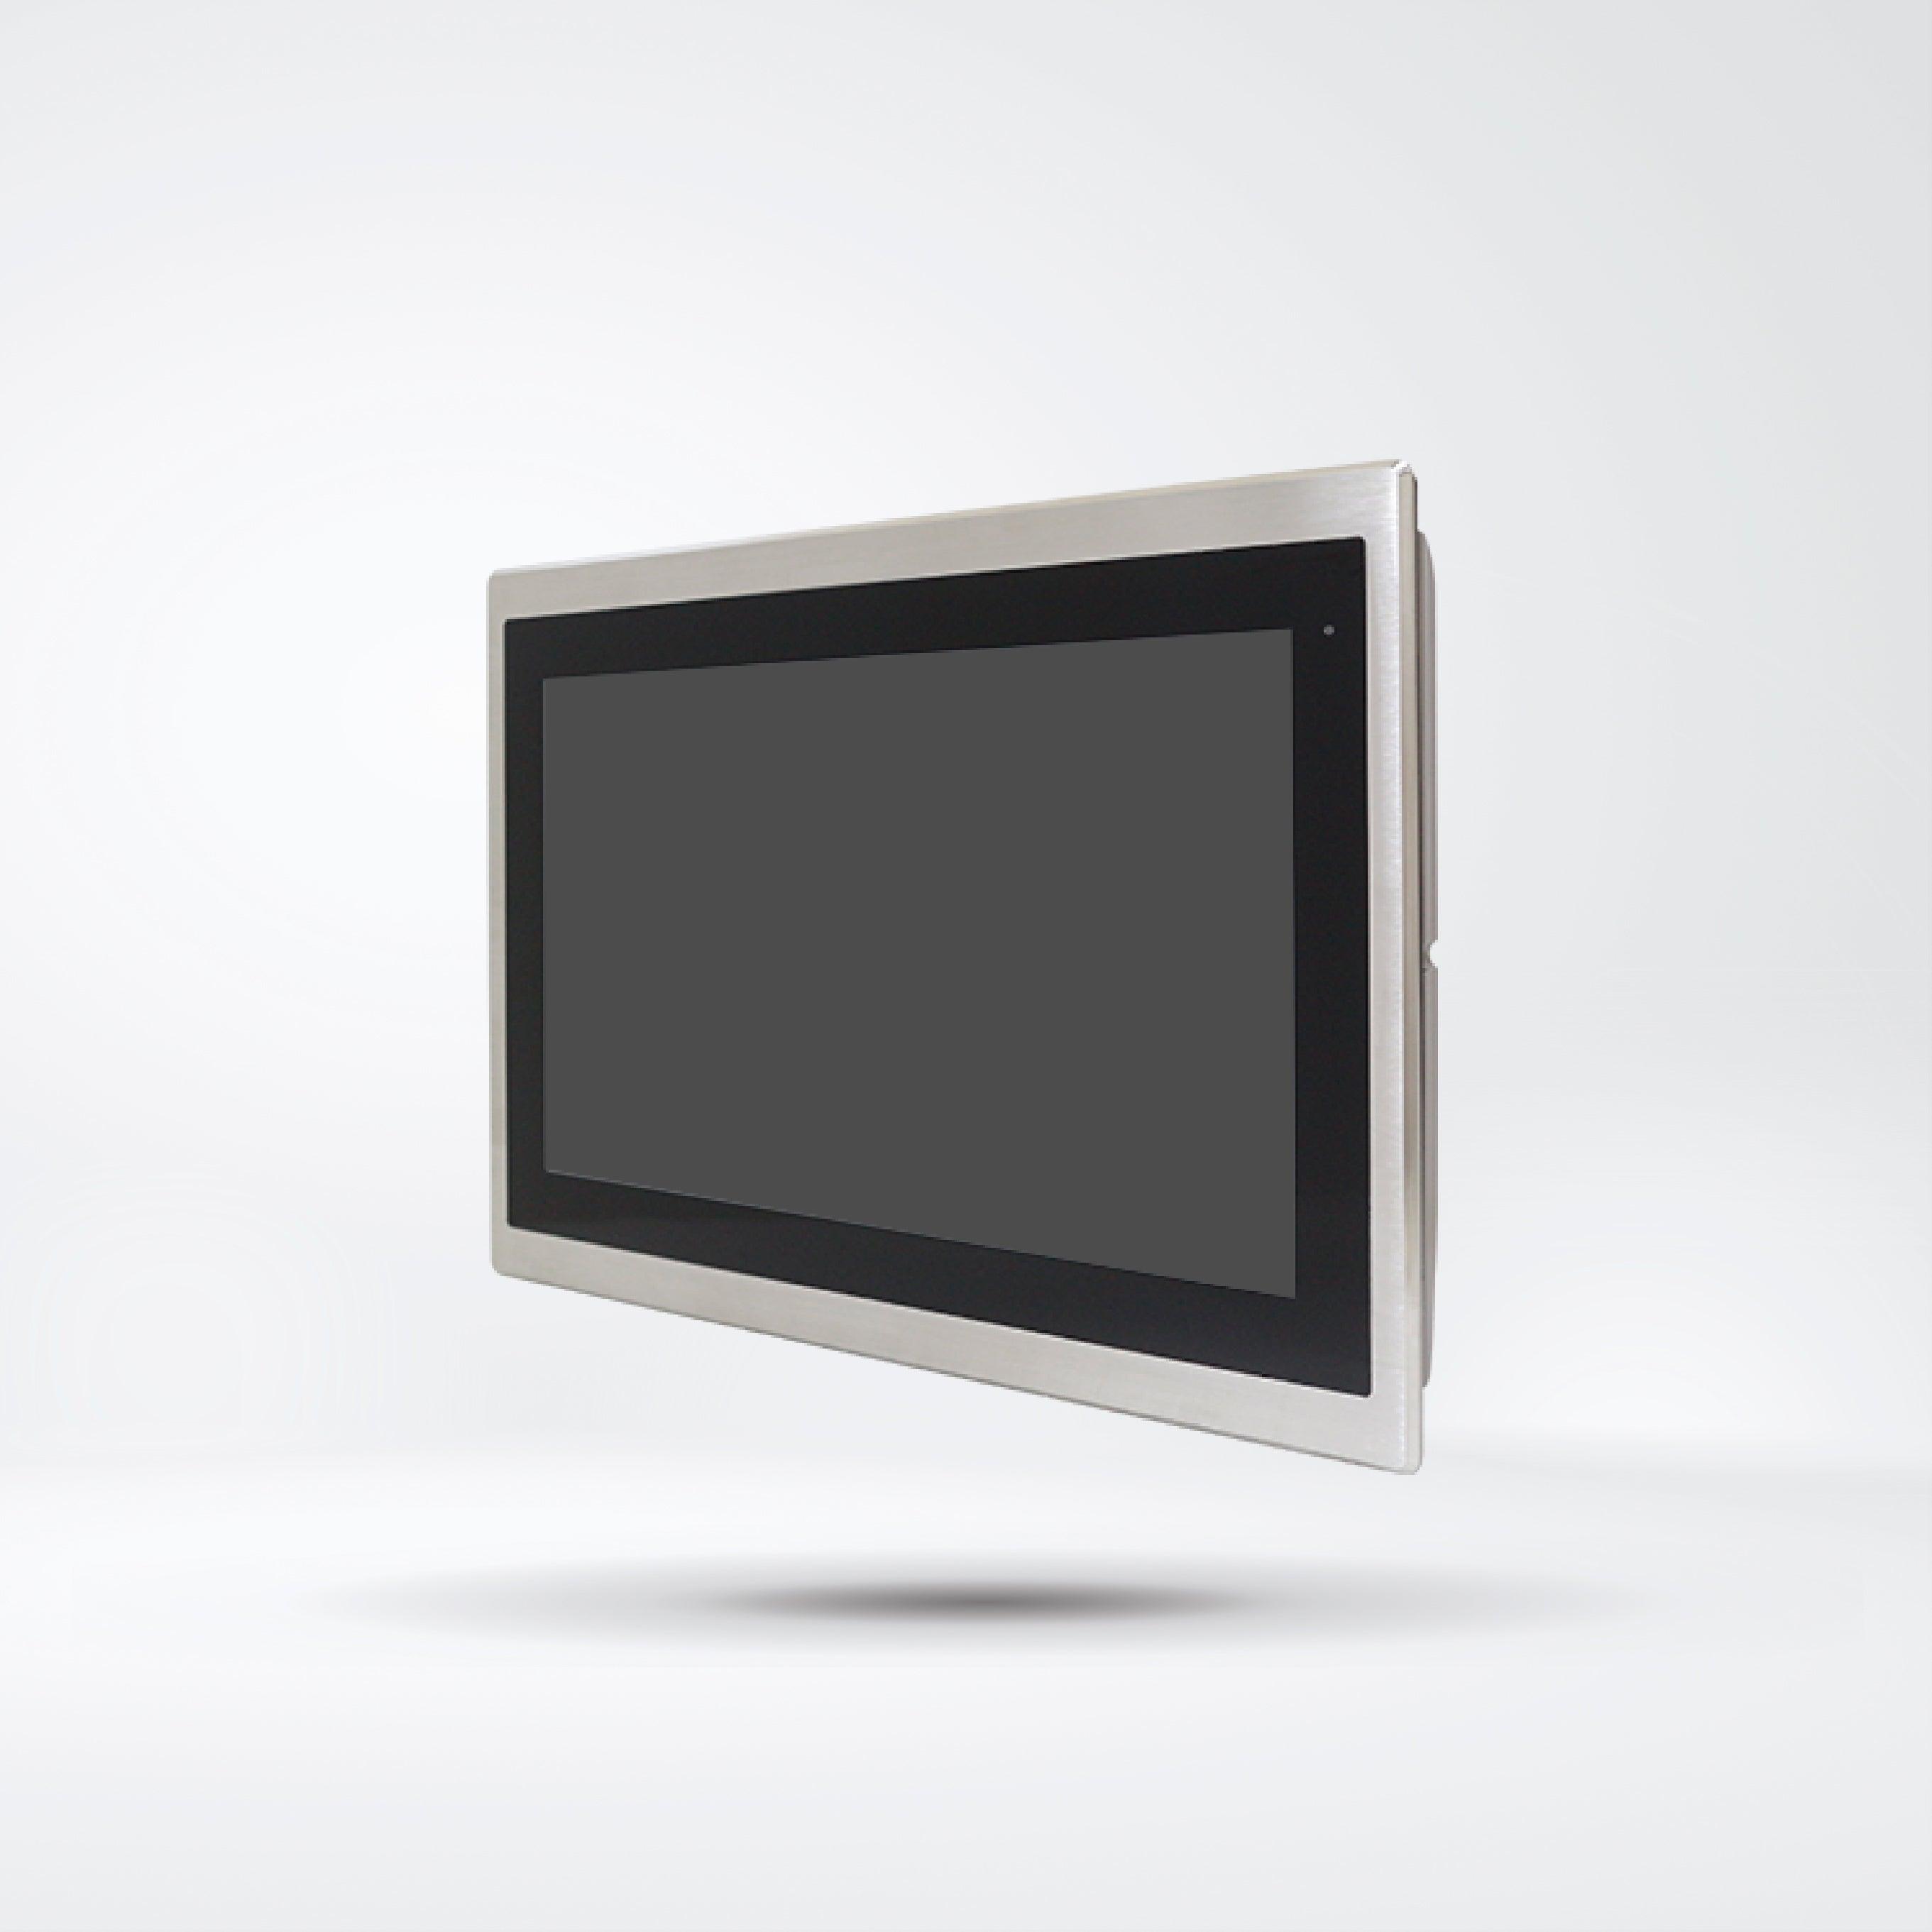 FABS-116RH 15.6” Flat Front Panel IP66 Stainless Chassis Display - Riverplus